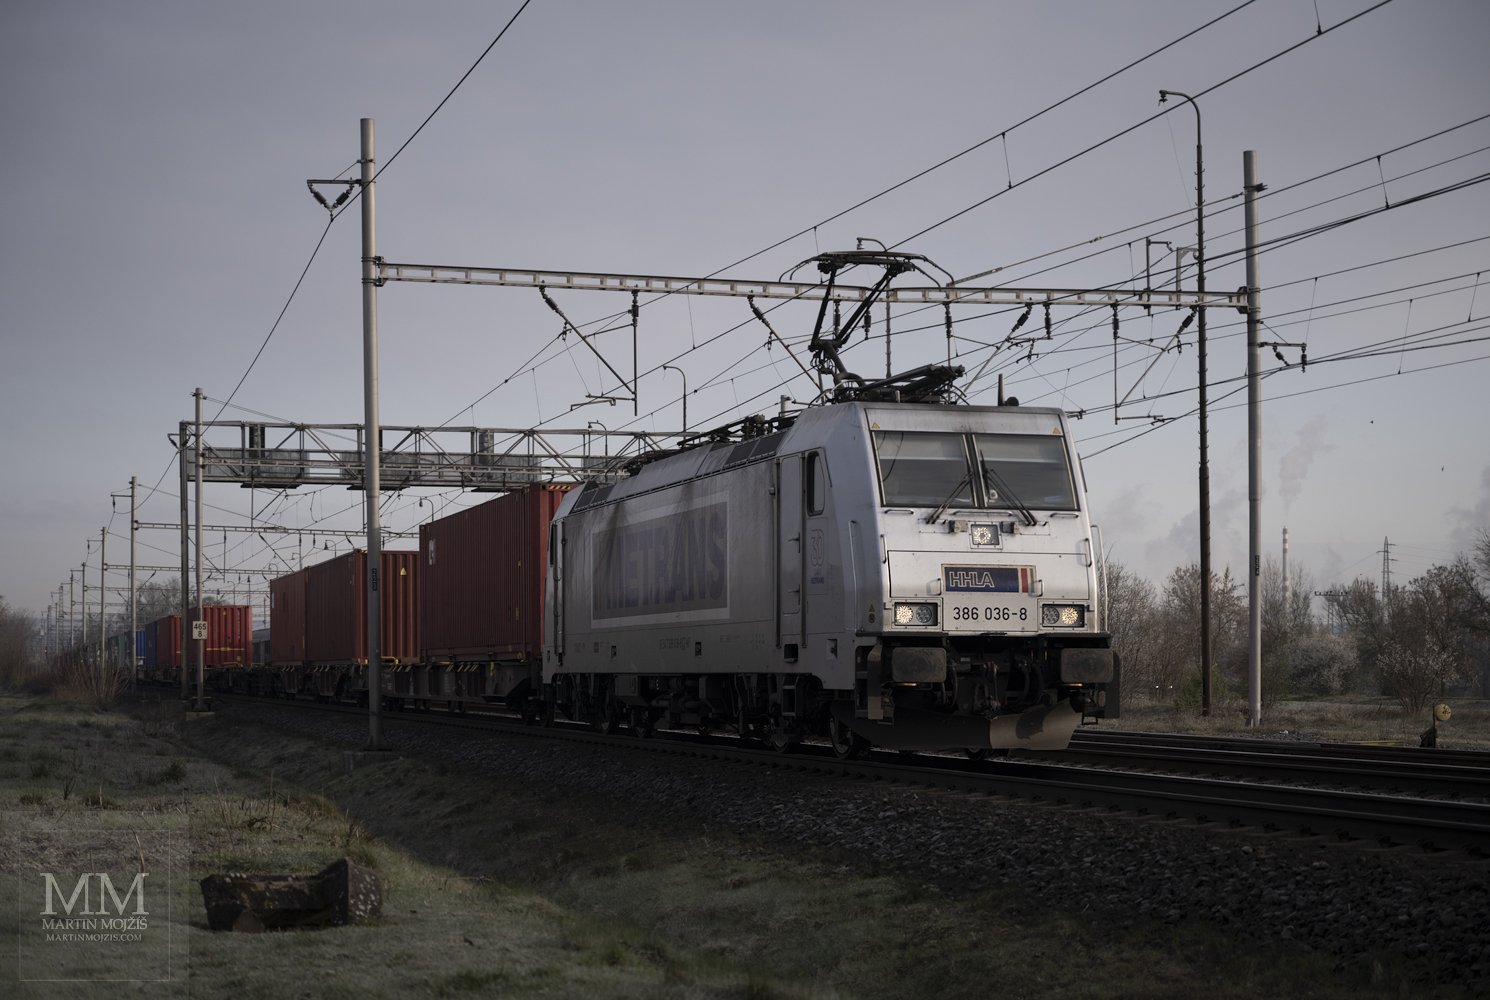 Locomotive 386 036-8 at the head of a freight container train.